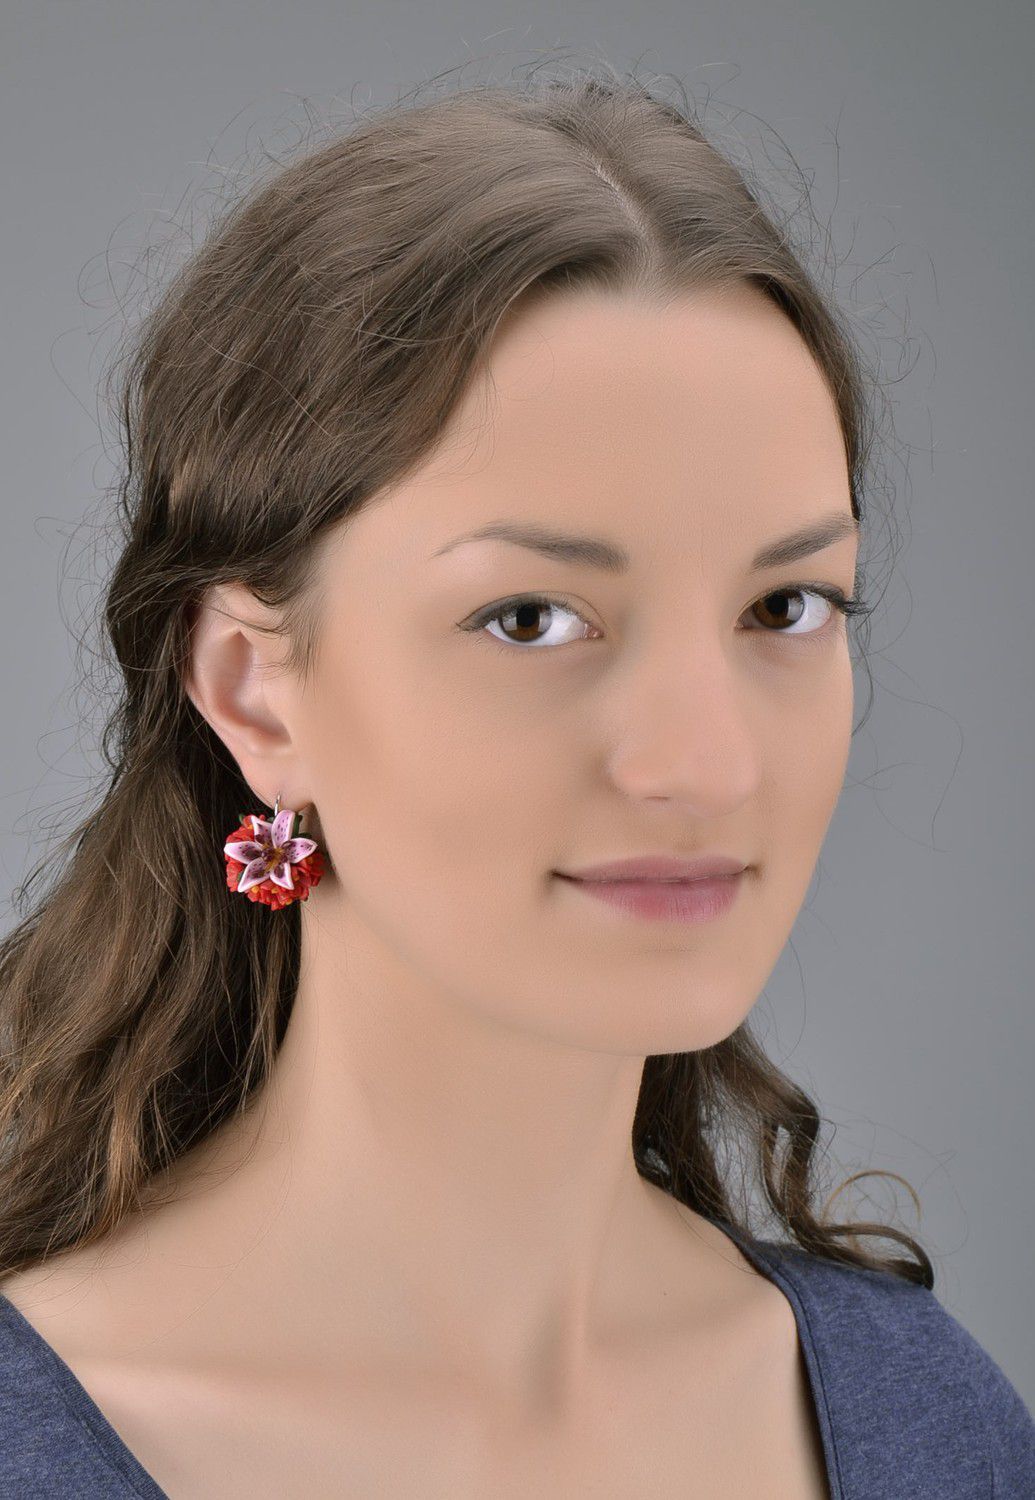 Handmade earrings made from polymer clay photo 5